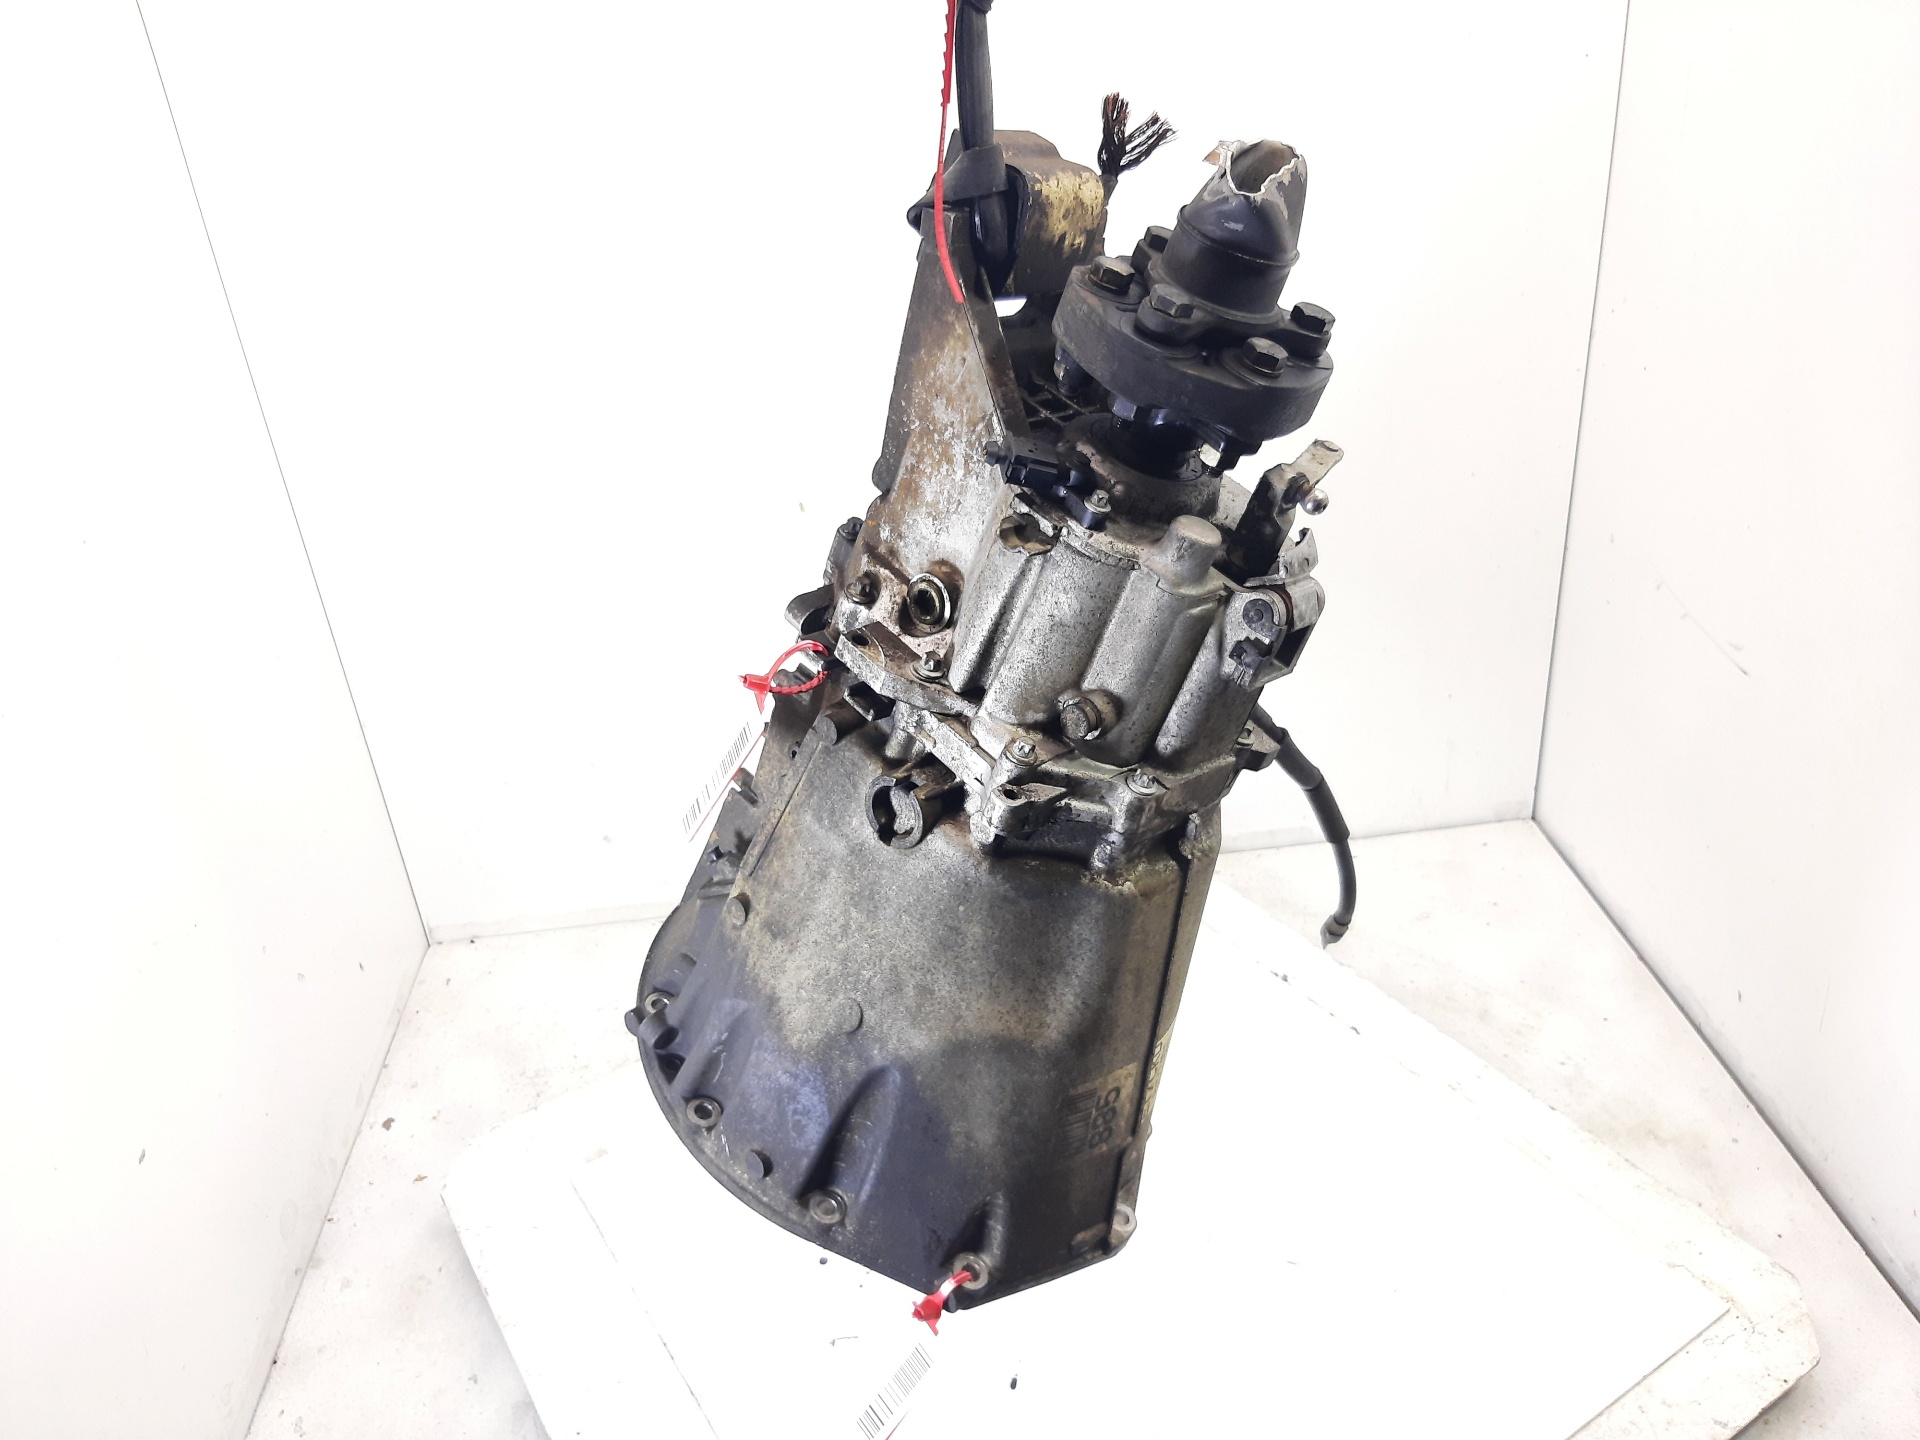 MERCEDES-BENZ C-Class W203/S203/CL203 (2000-2008) Gearbox R2032610701, 6VELOCIDADES 23032115